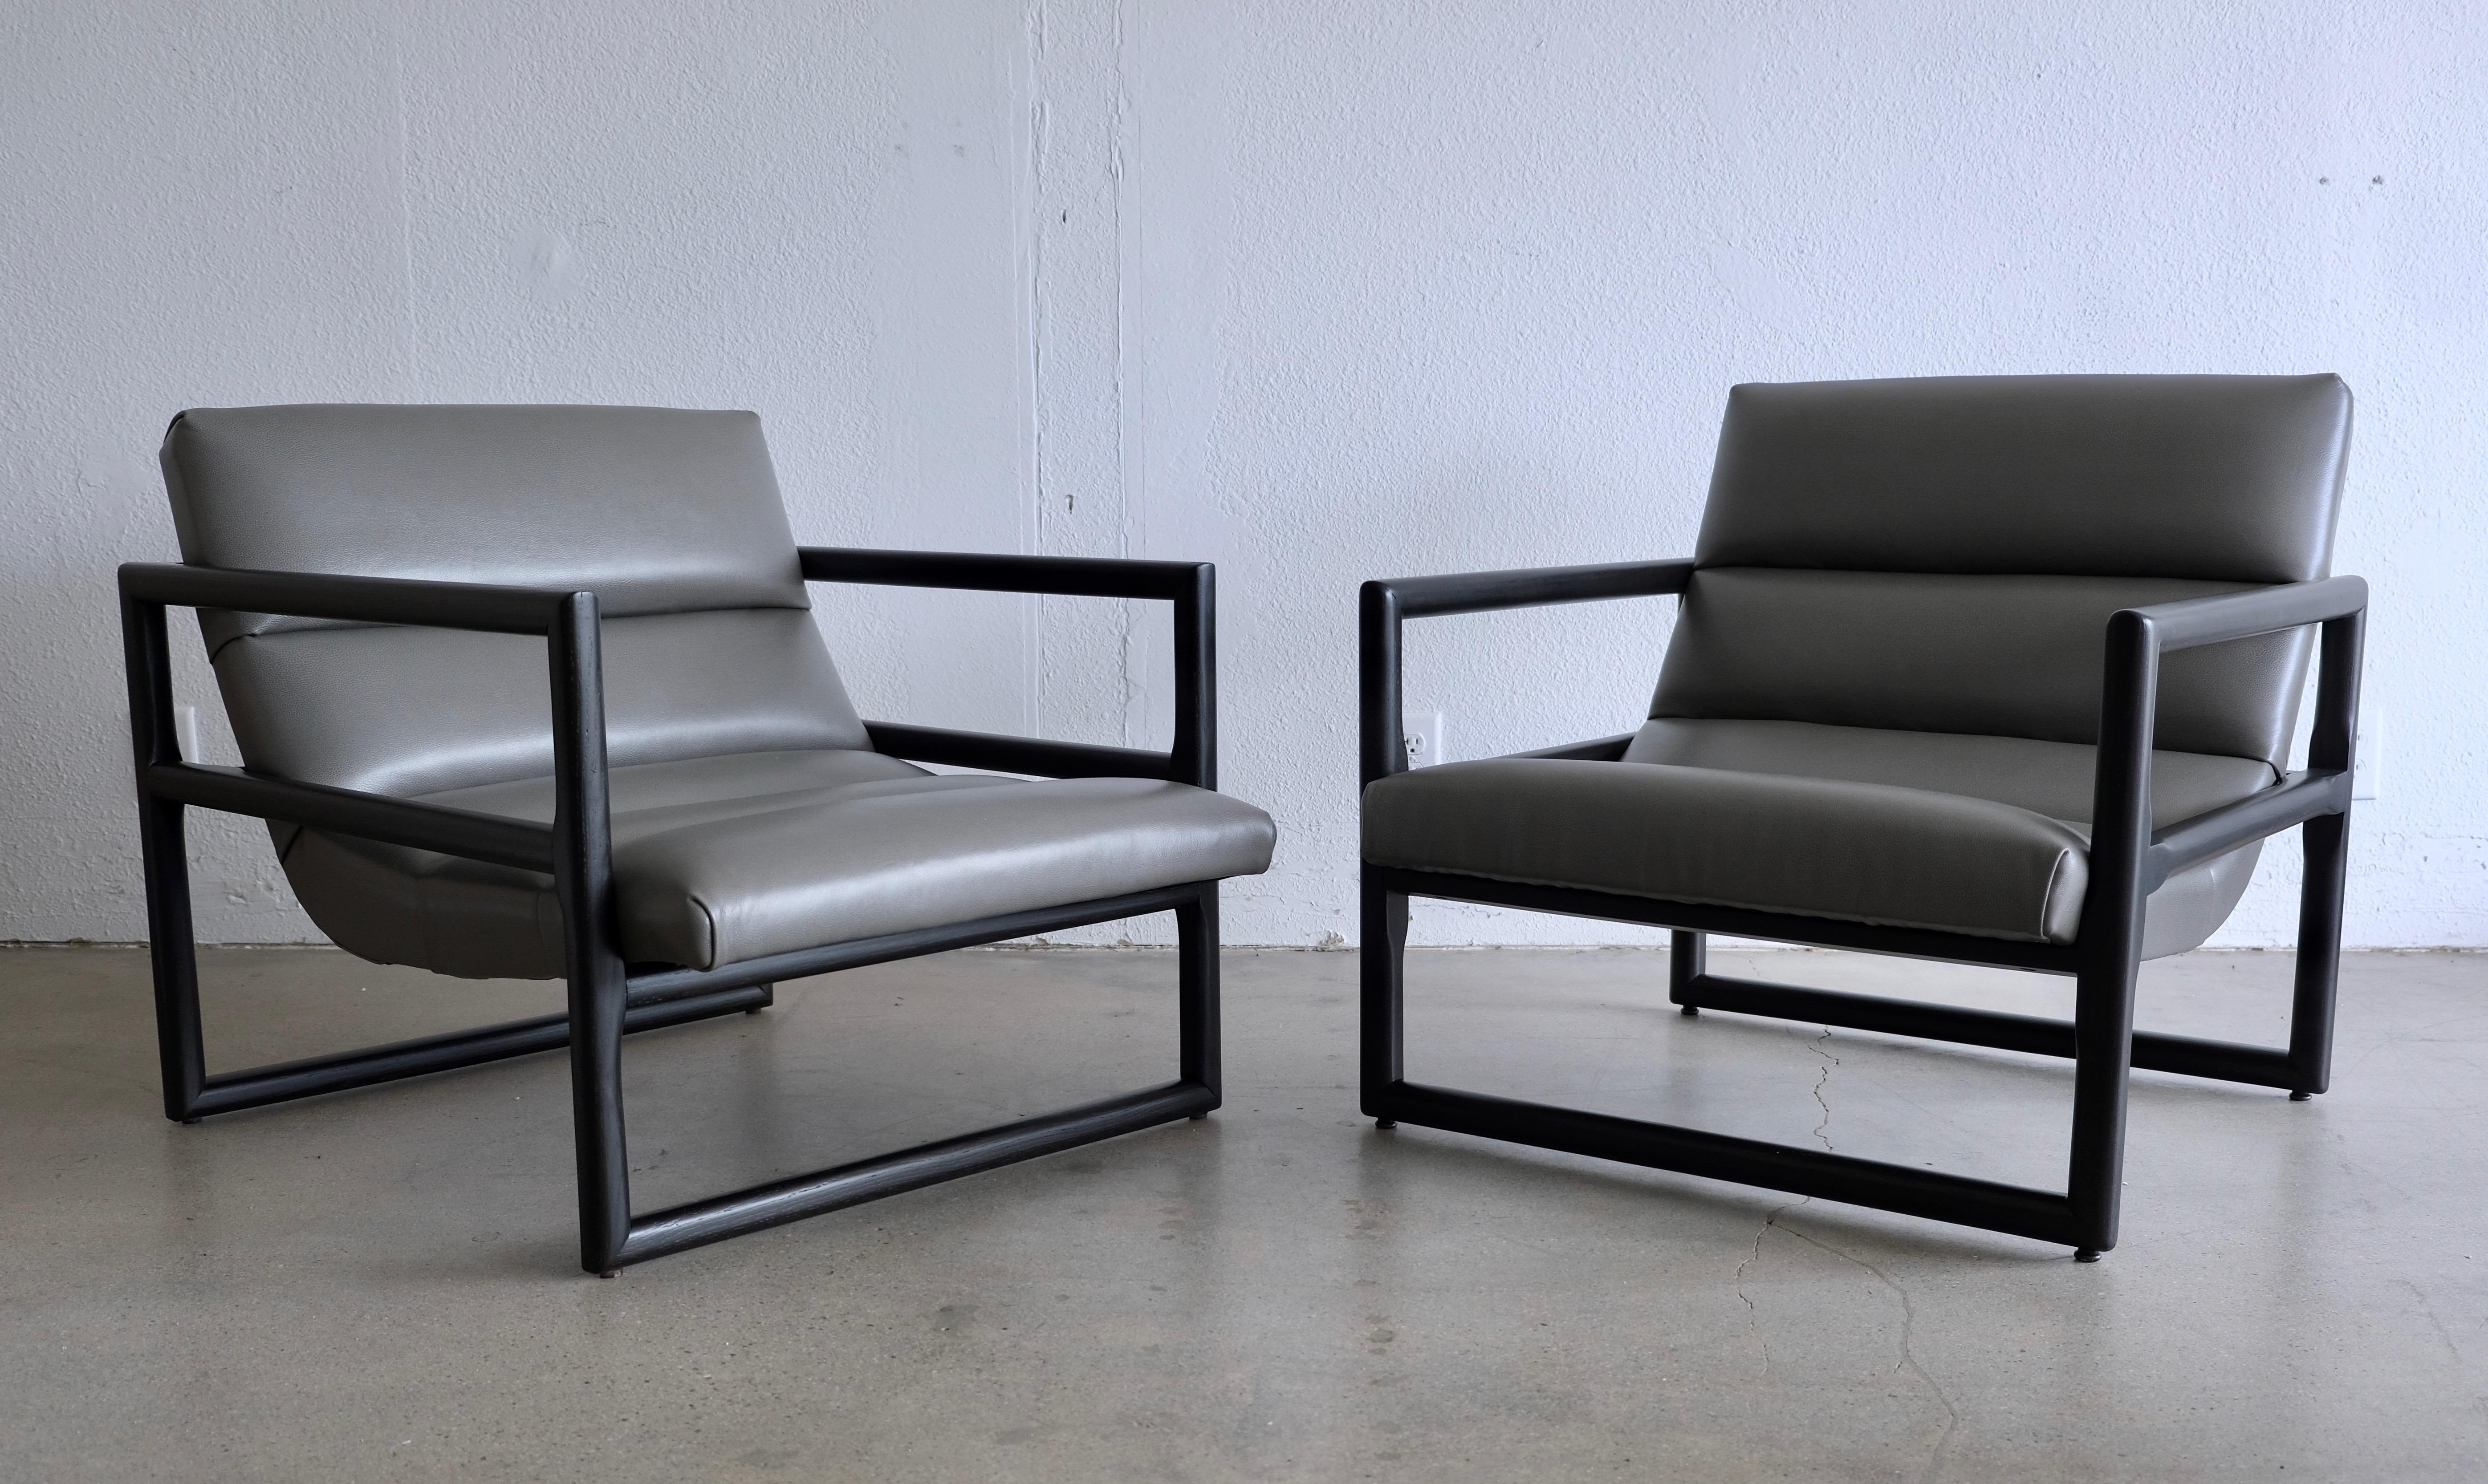 Two Milo Baughman scoop lounge chairs that have been completed redone. The solid oak frames have been ebonized black and the upholstery has been covered in a subtle pebbled gray leather. The chairs have differences so they don't make an exact pair.